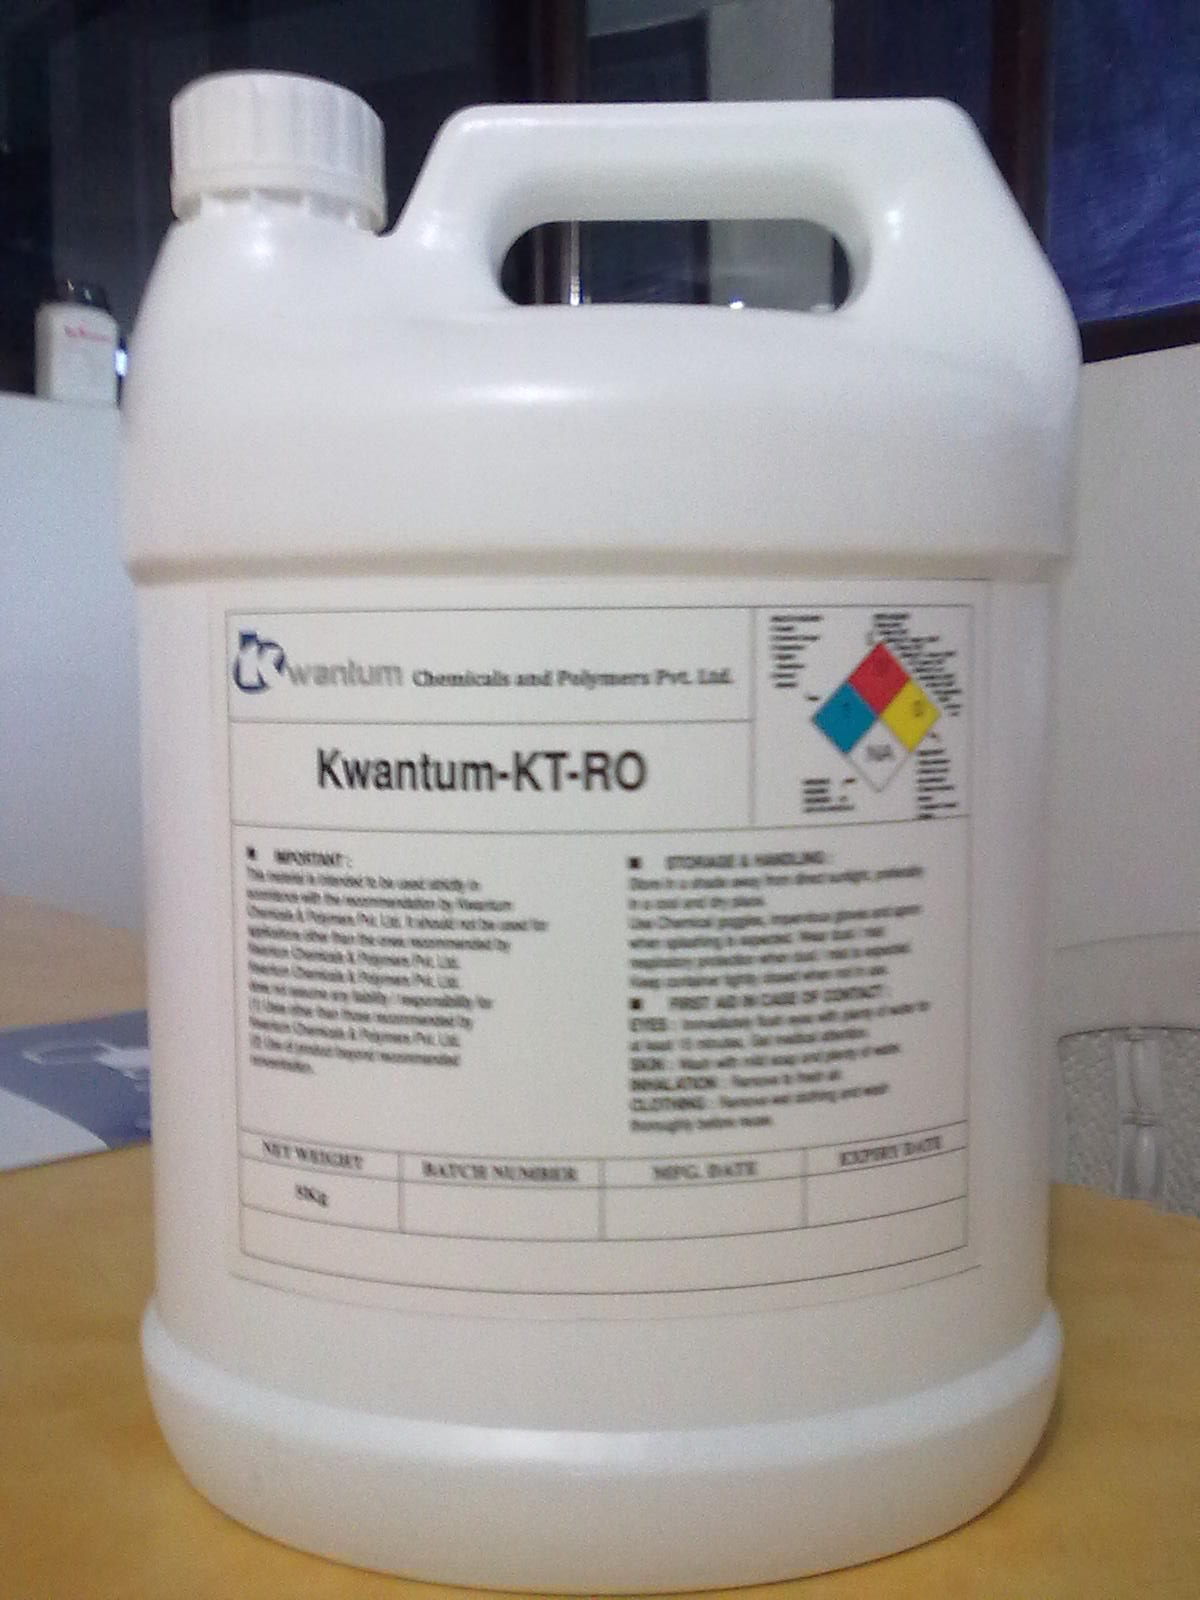 reverse osmosis chemical